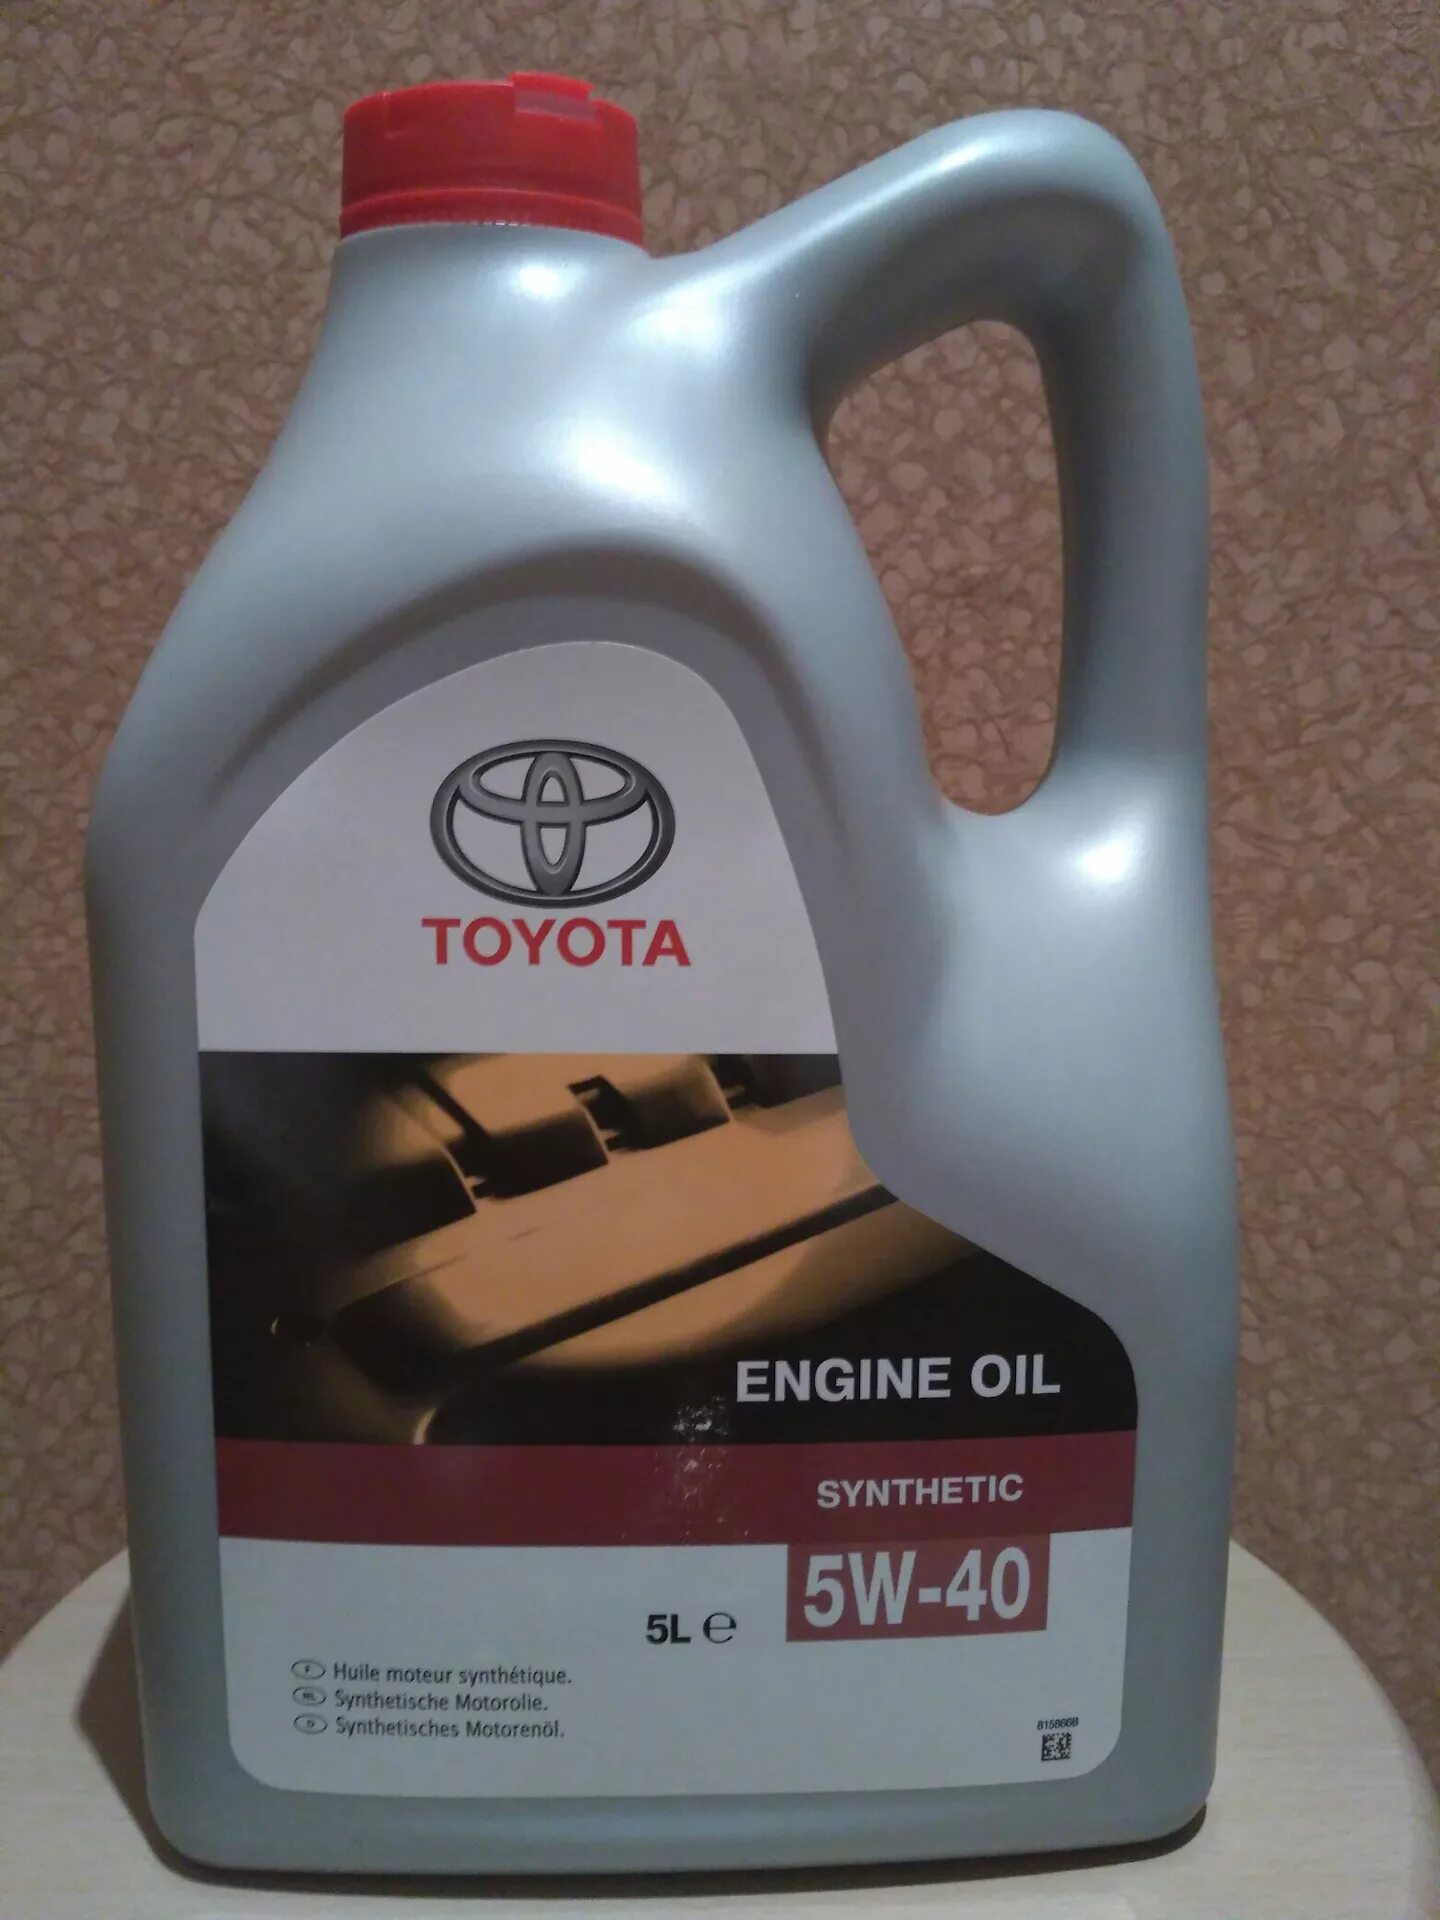 Моторное масло Тойота 5w40. Toyota engine Oil Synthetic 5w-40. Масло Тойота 5w40 оригинал. Toyota 08880-80375. Масло тойота 5w40 5